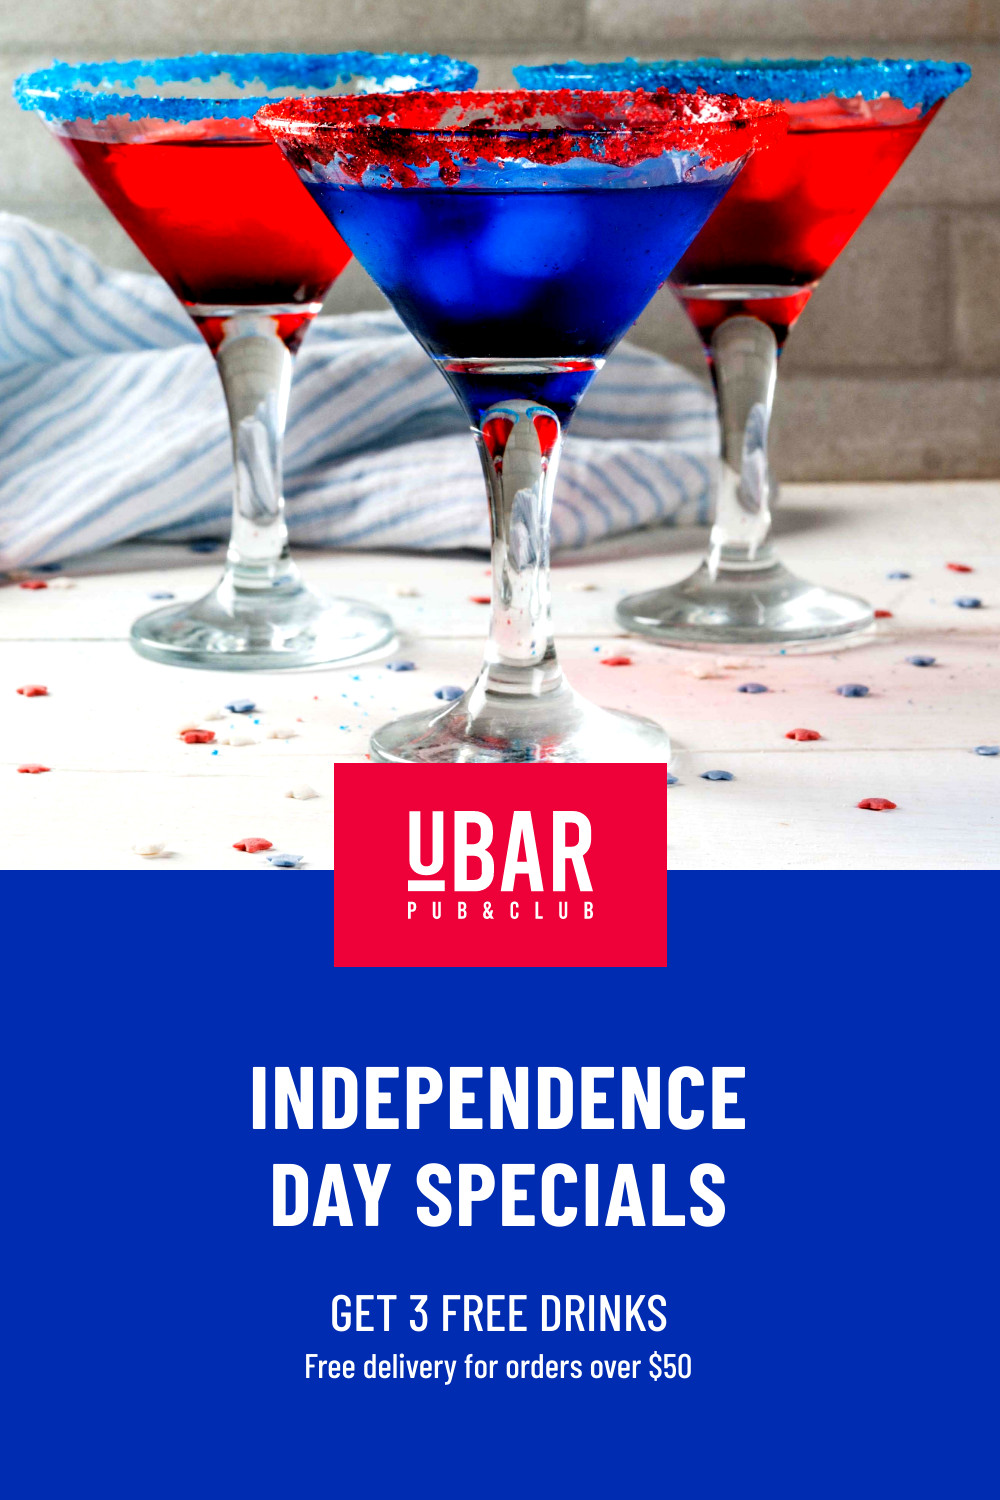 Independence Day Drink Specials Facebook Cover 820x360